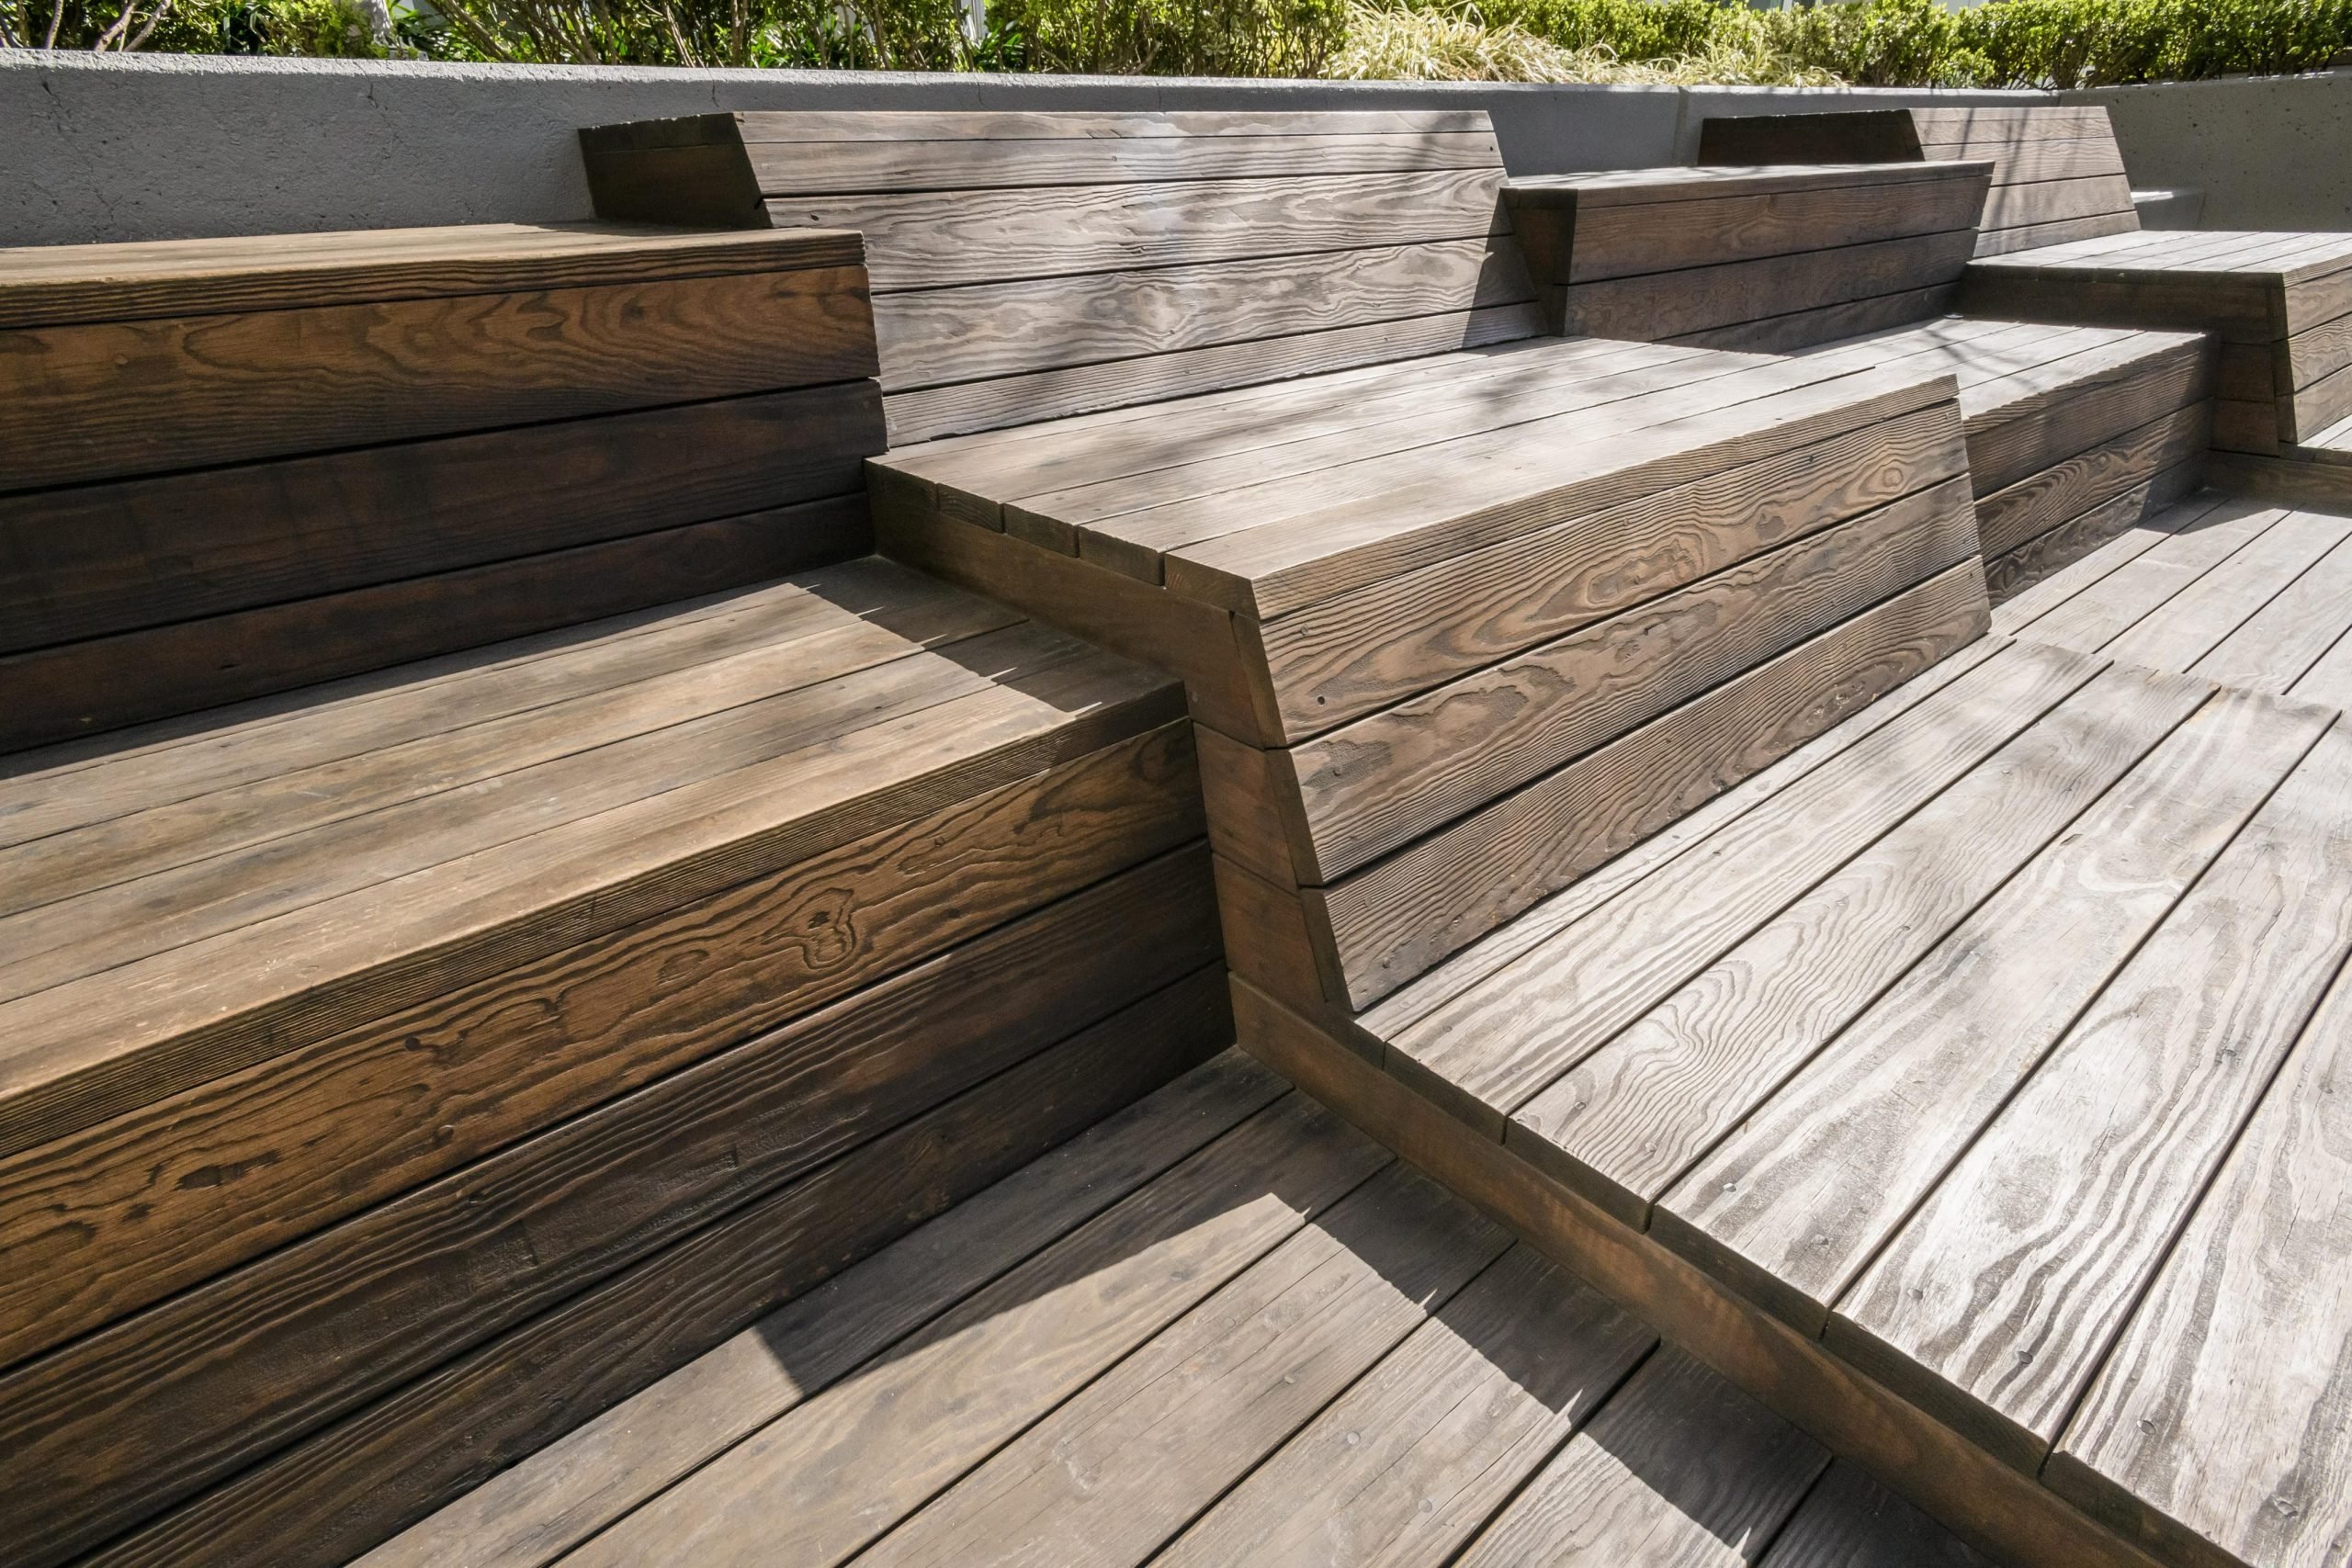 The seating areas and benches in this outdoor retail plaza feature Kebony Modified Wood Clear decking and is located at the 303 Second Street property